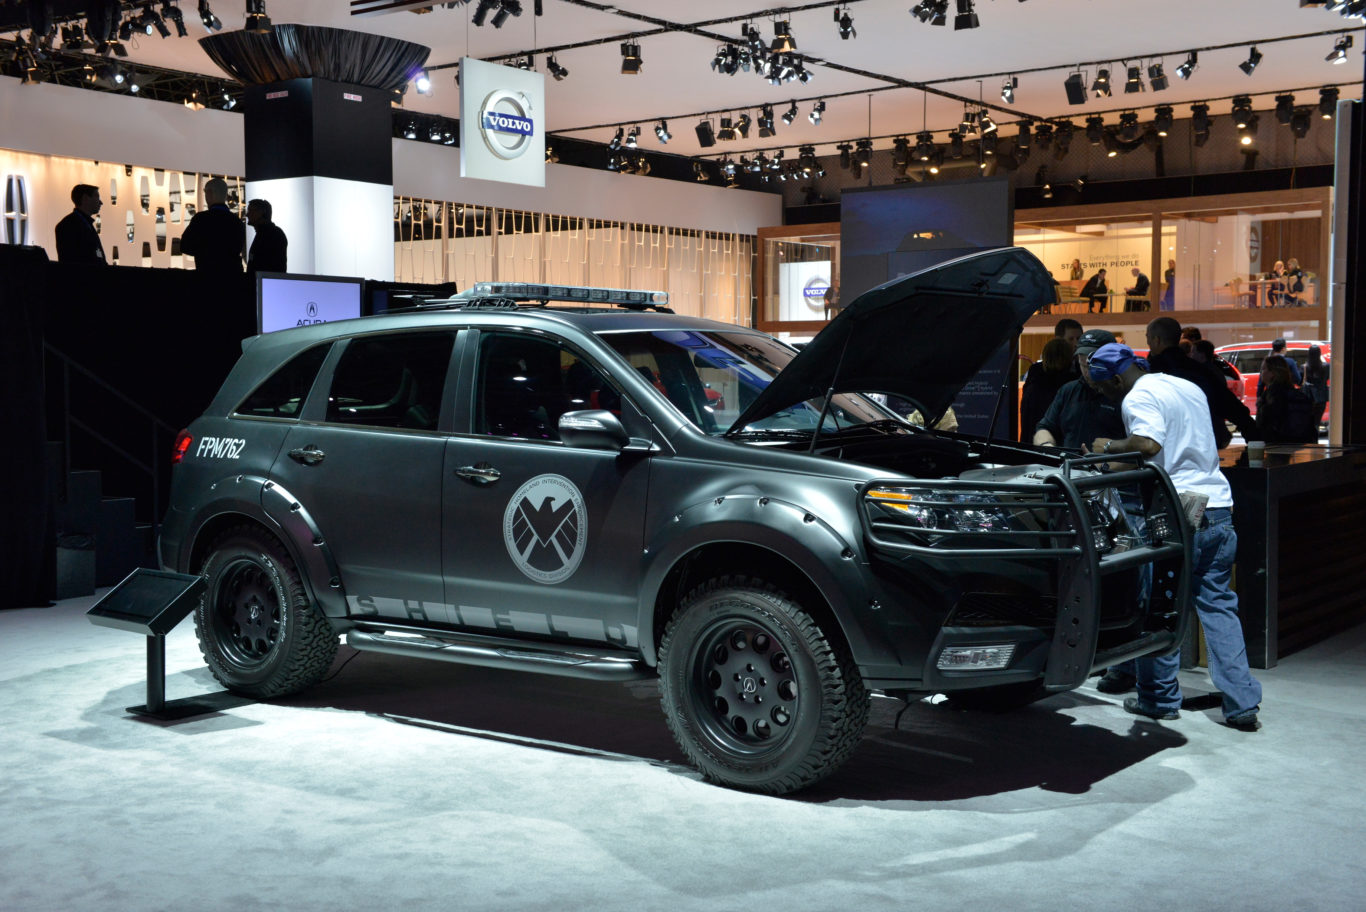 The rugged MDX from the TV series on display.